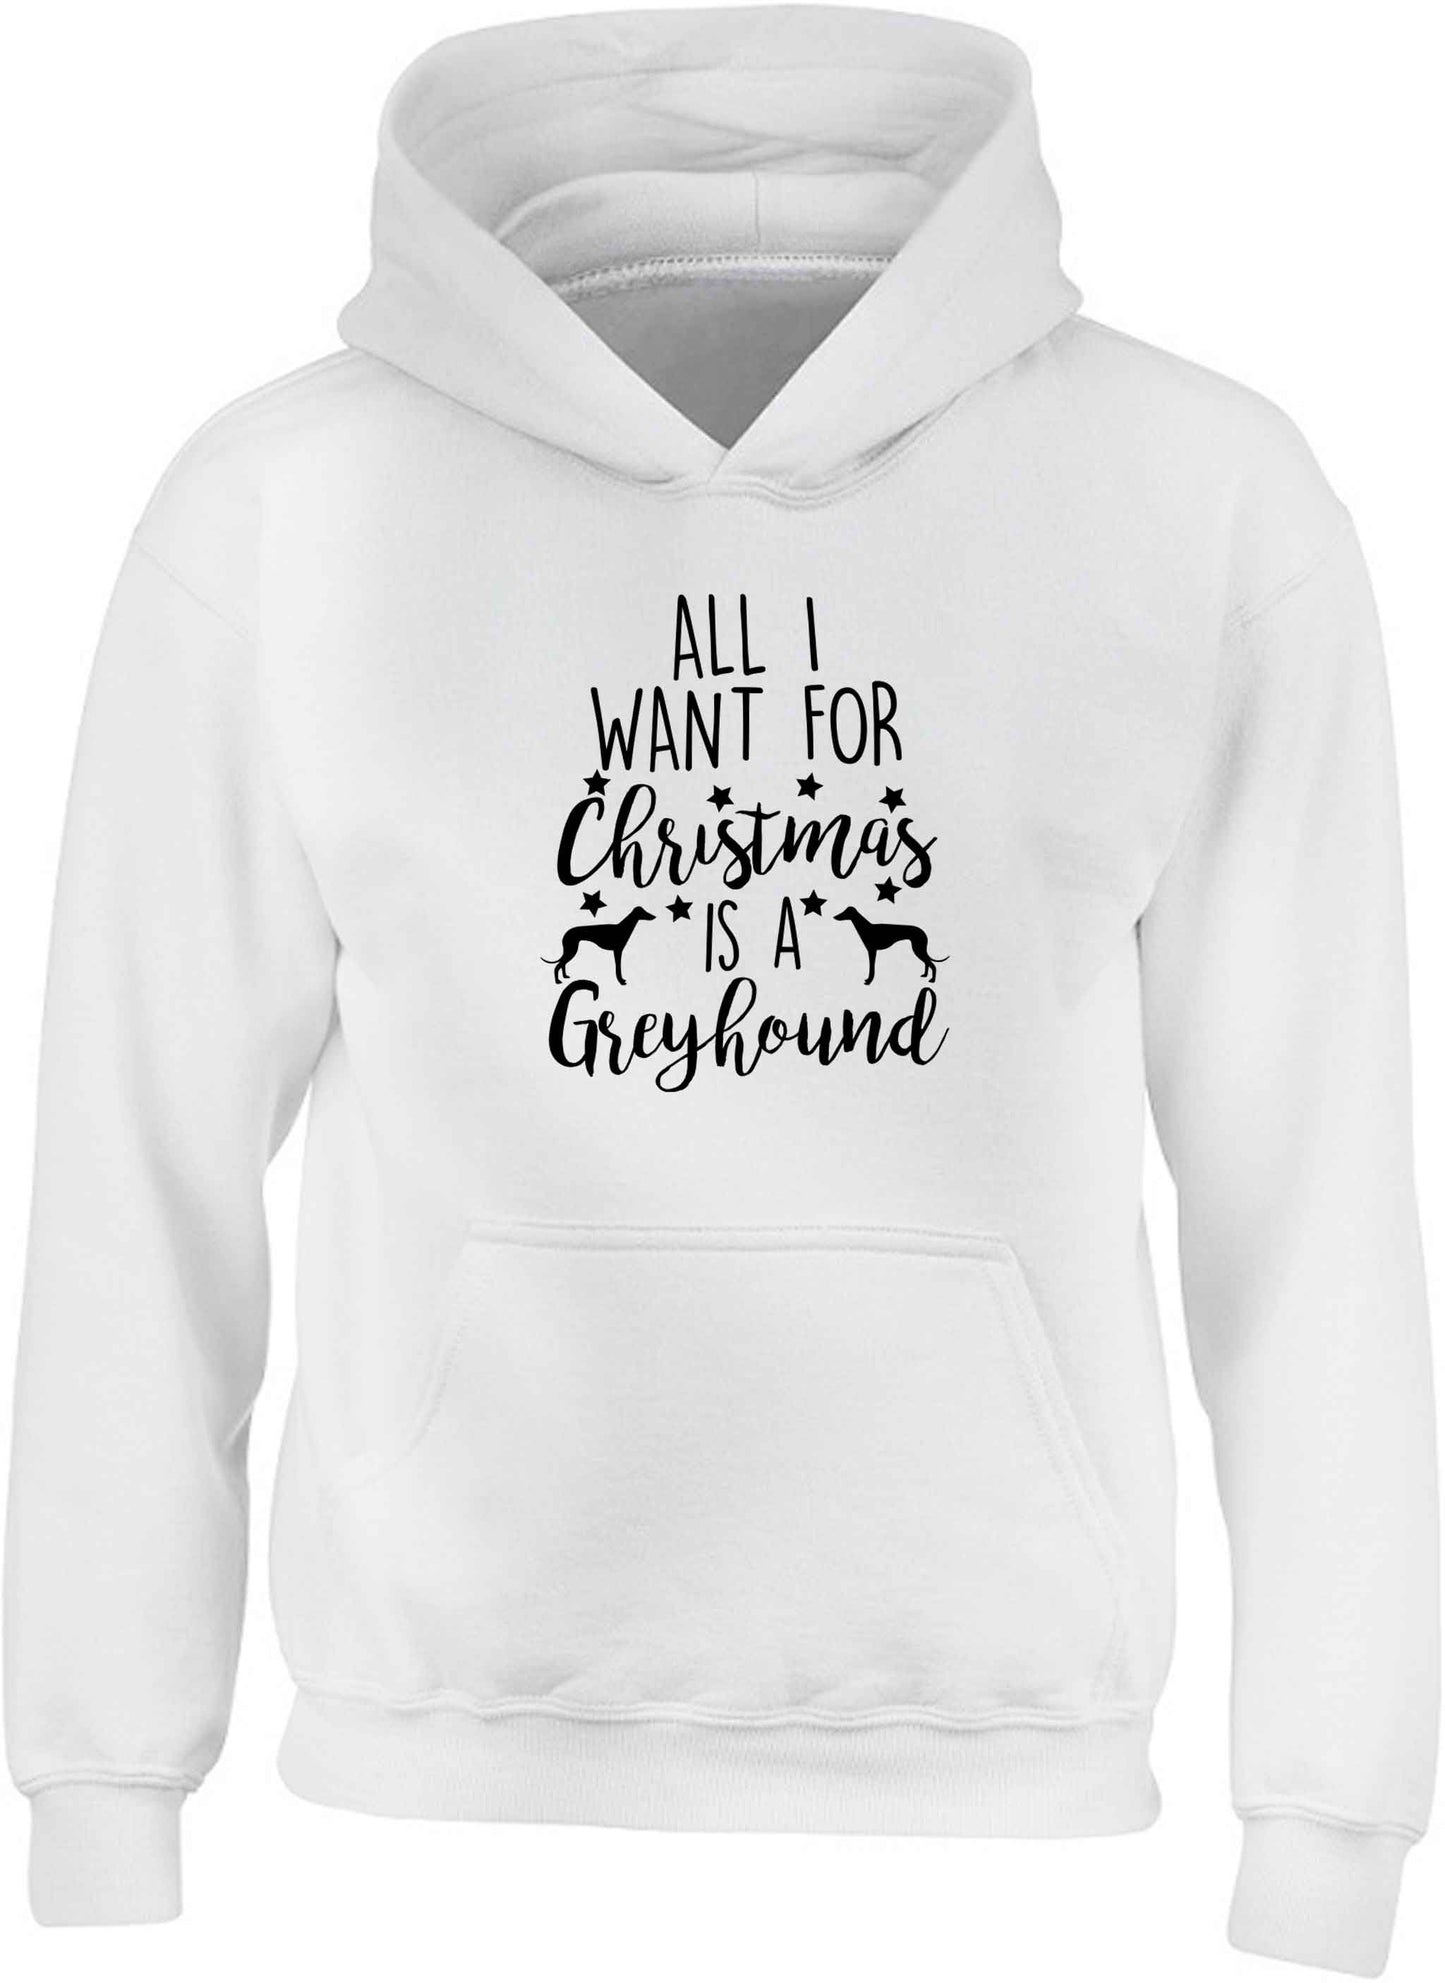 All I want for Christmas is a greyhound children's white hoodie 12-13 Years